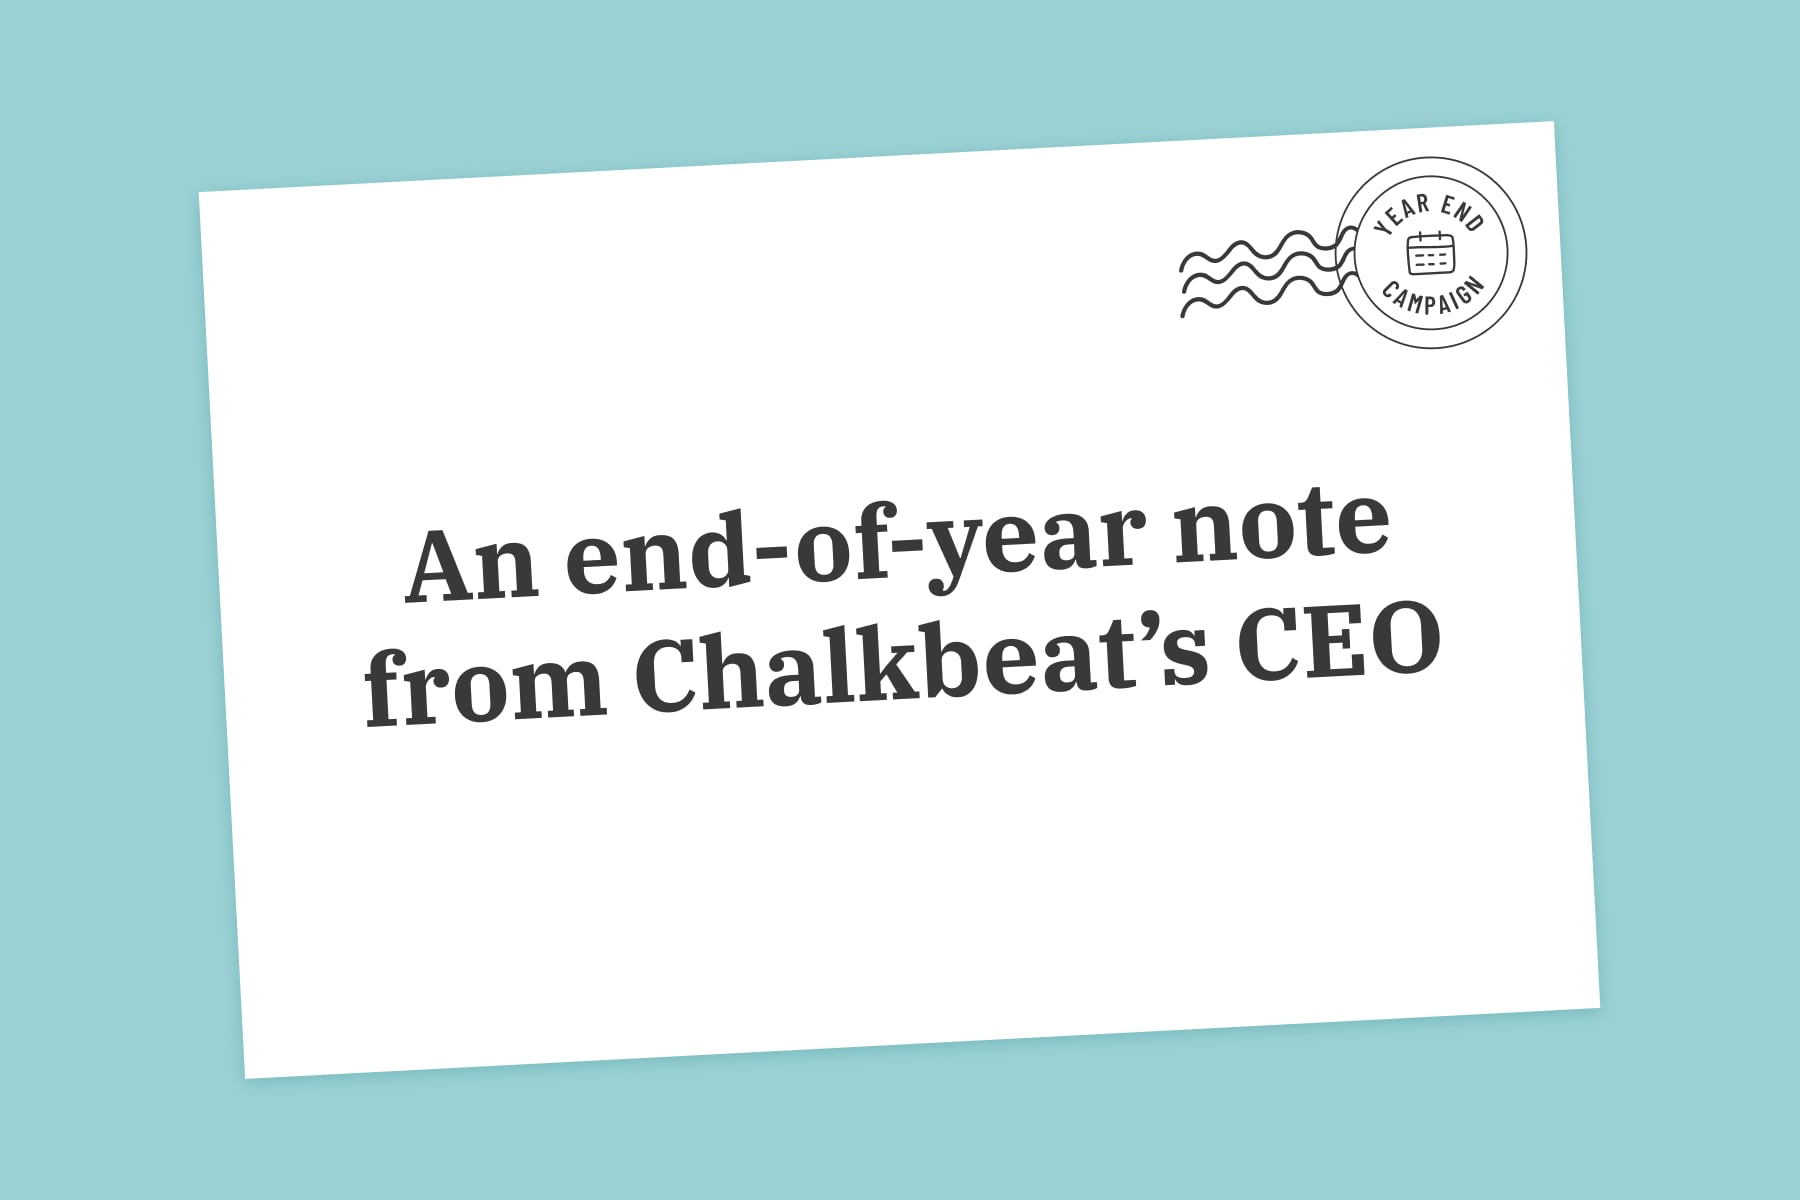 A white envelope against a teal background. Text on the envelope reads: An end of year note from Chalkbeat’s CEO. A stamp in the corner of the envelope reads: end of year campaign.